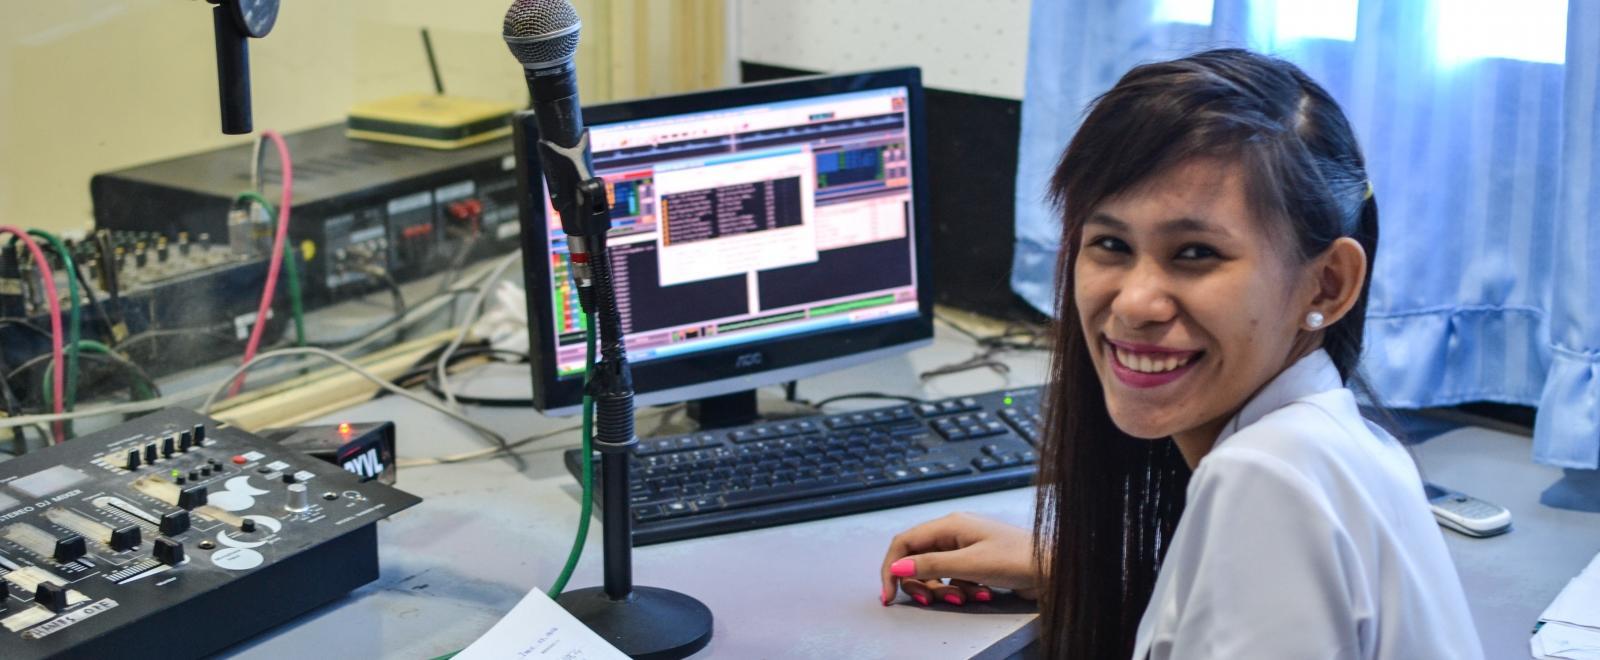 A local DJ at a radio station in the Philippines, where Projects Abroad places interns doing Journalism internships abroad.